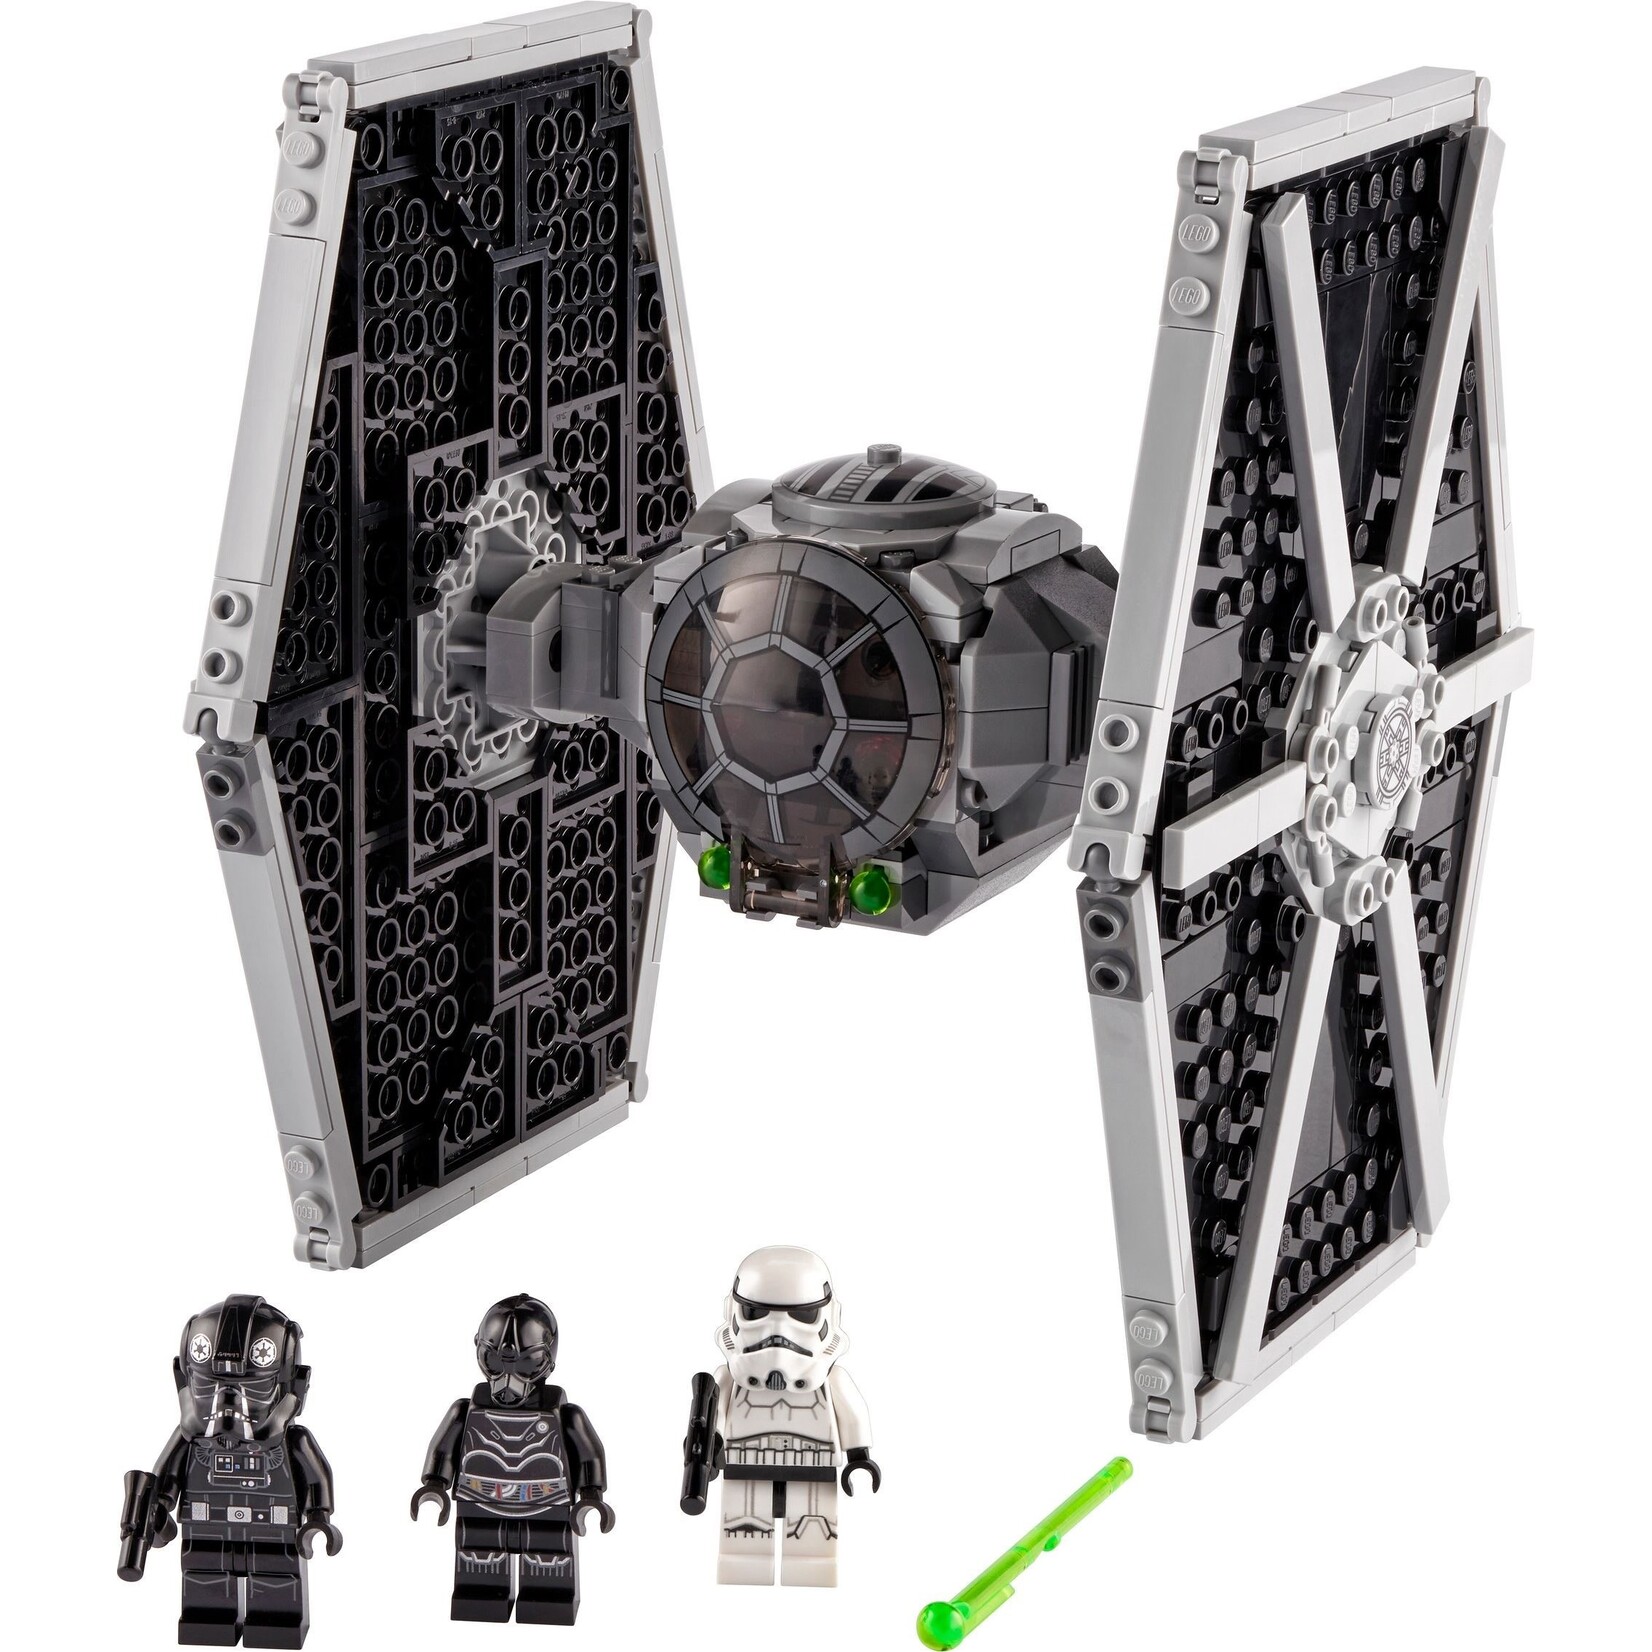 LEGO Imperial TIE Fighter™ 75300